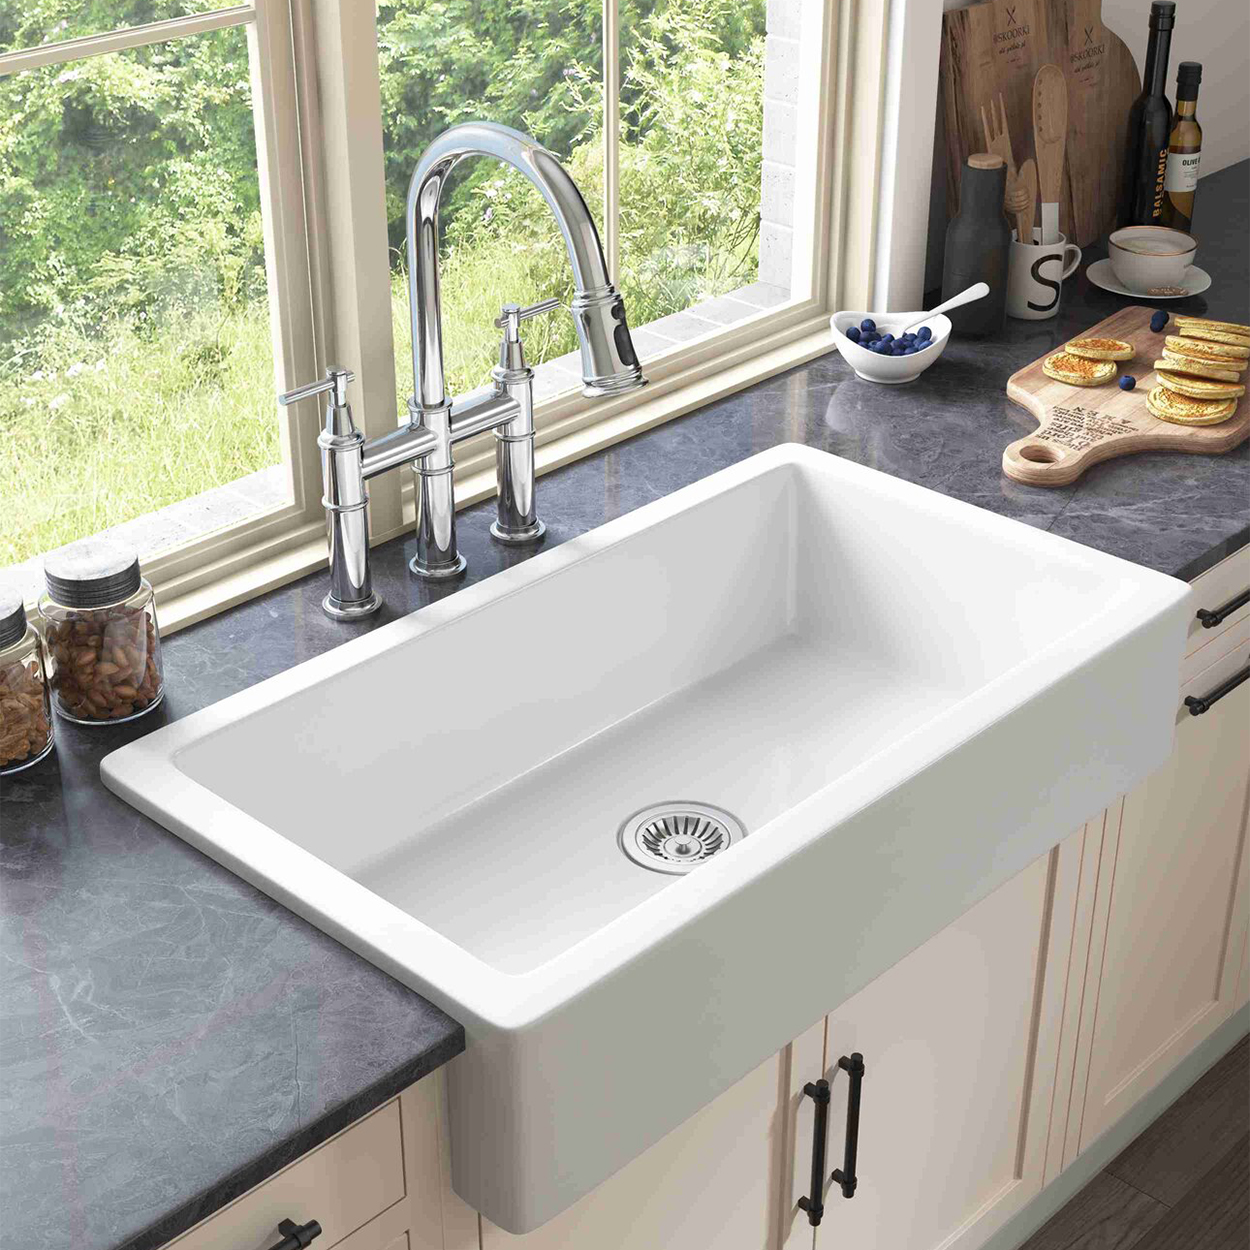 Transitional Bridge Kitchen Faucet with Pull-Down Sprayhead in Matte Black